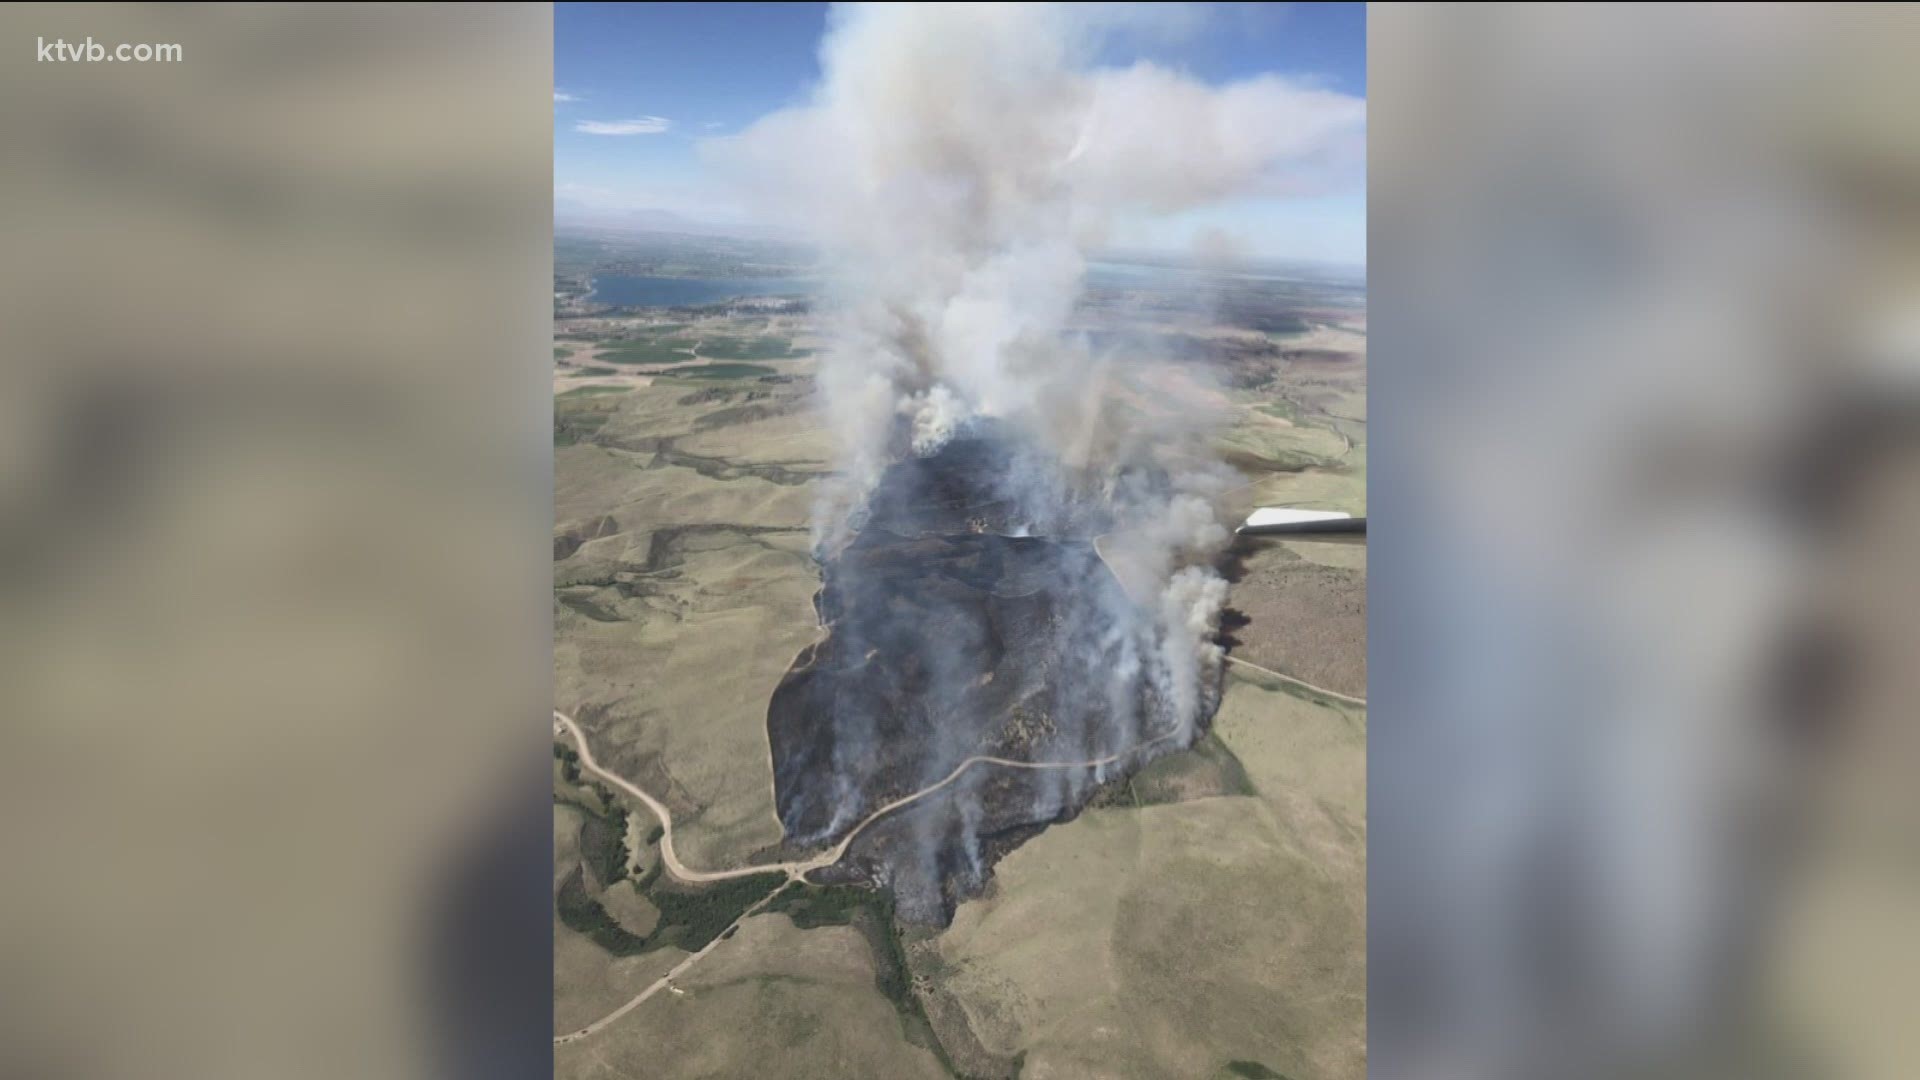 The fire began just after 3:30 p.m. on Monday, according to the Bureau of Land Management.